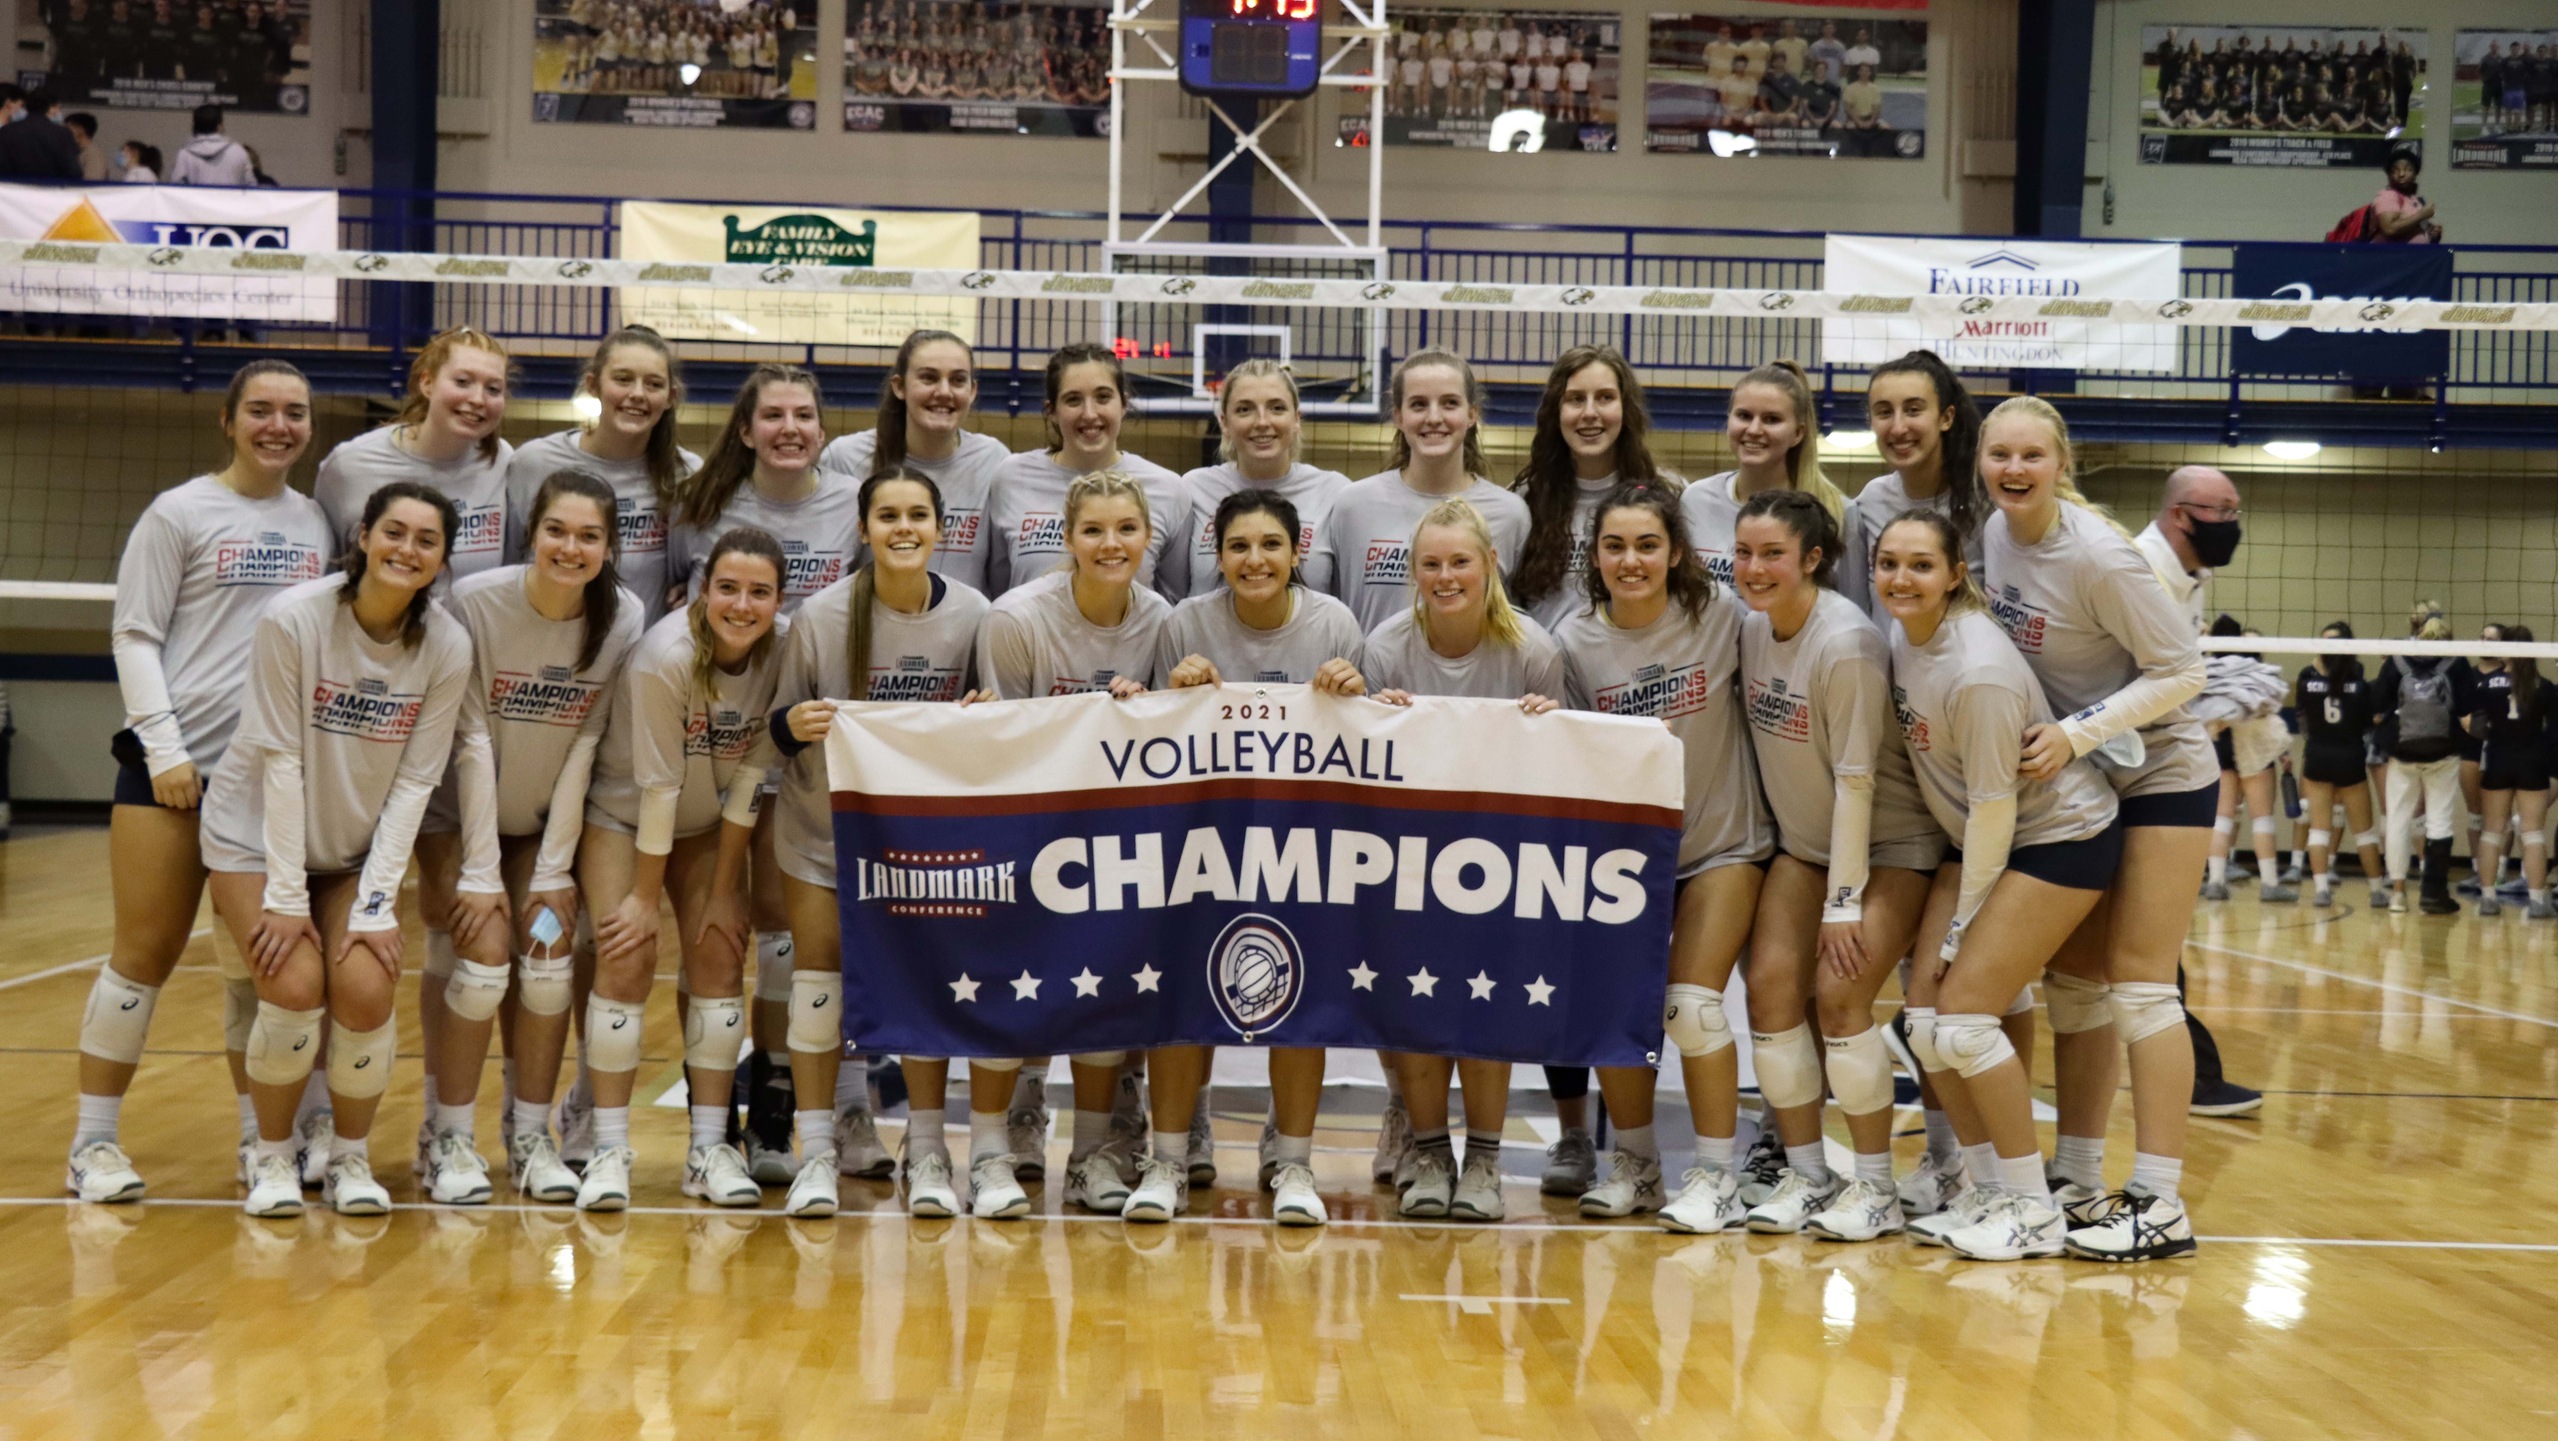 Women's Volleyball captured their 40th straight Conference Championship Saturday Night.